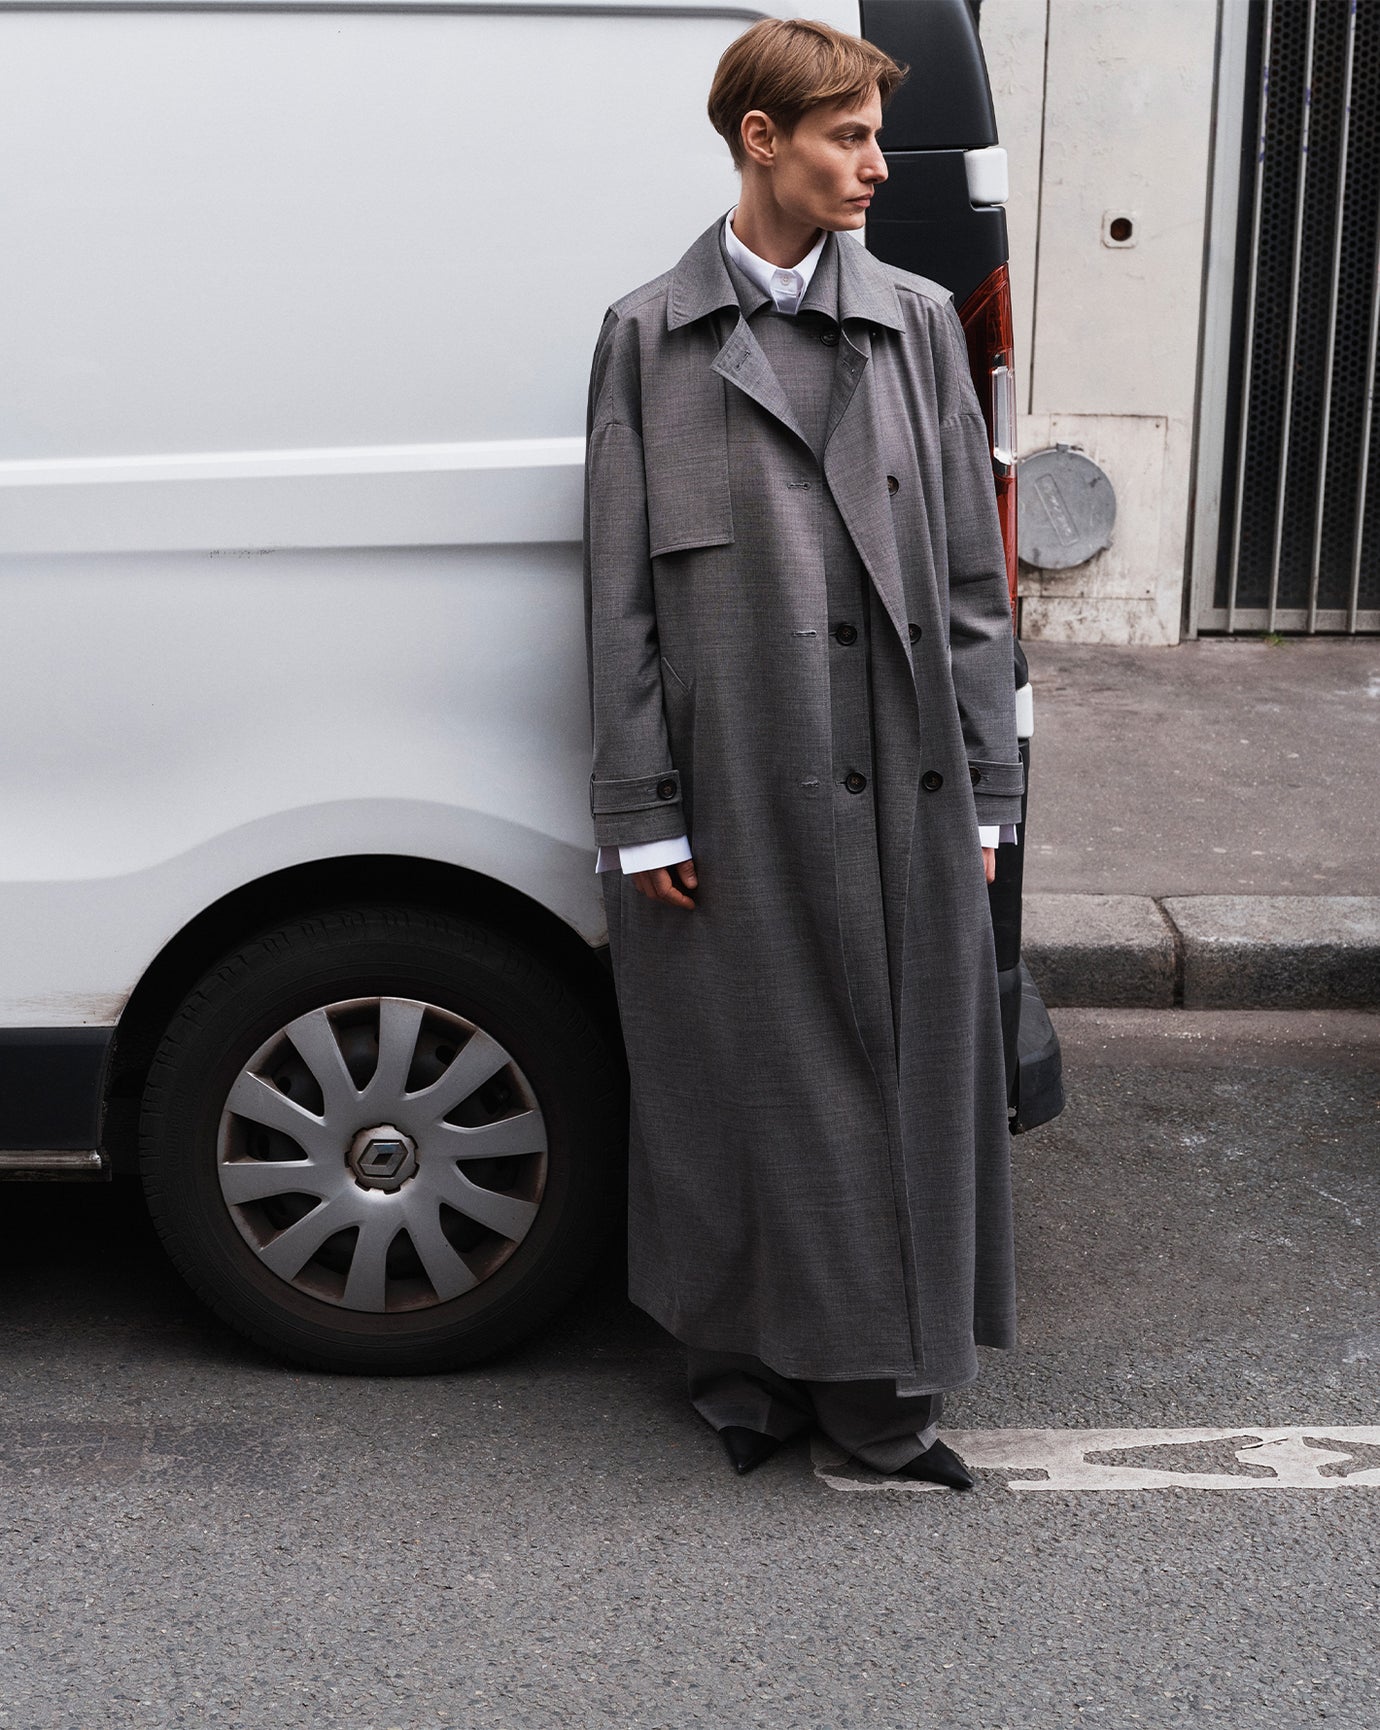 Model Veronika Kunz photographed by Sarah Blais in the streets of Paris wearing The Frankie Shop long grey jacket.  